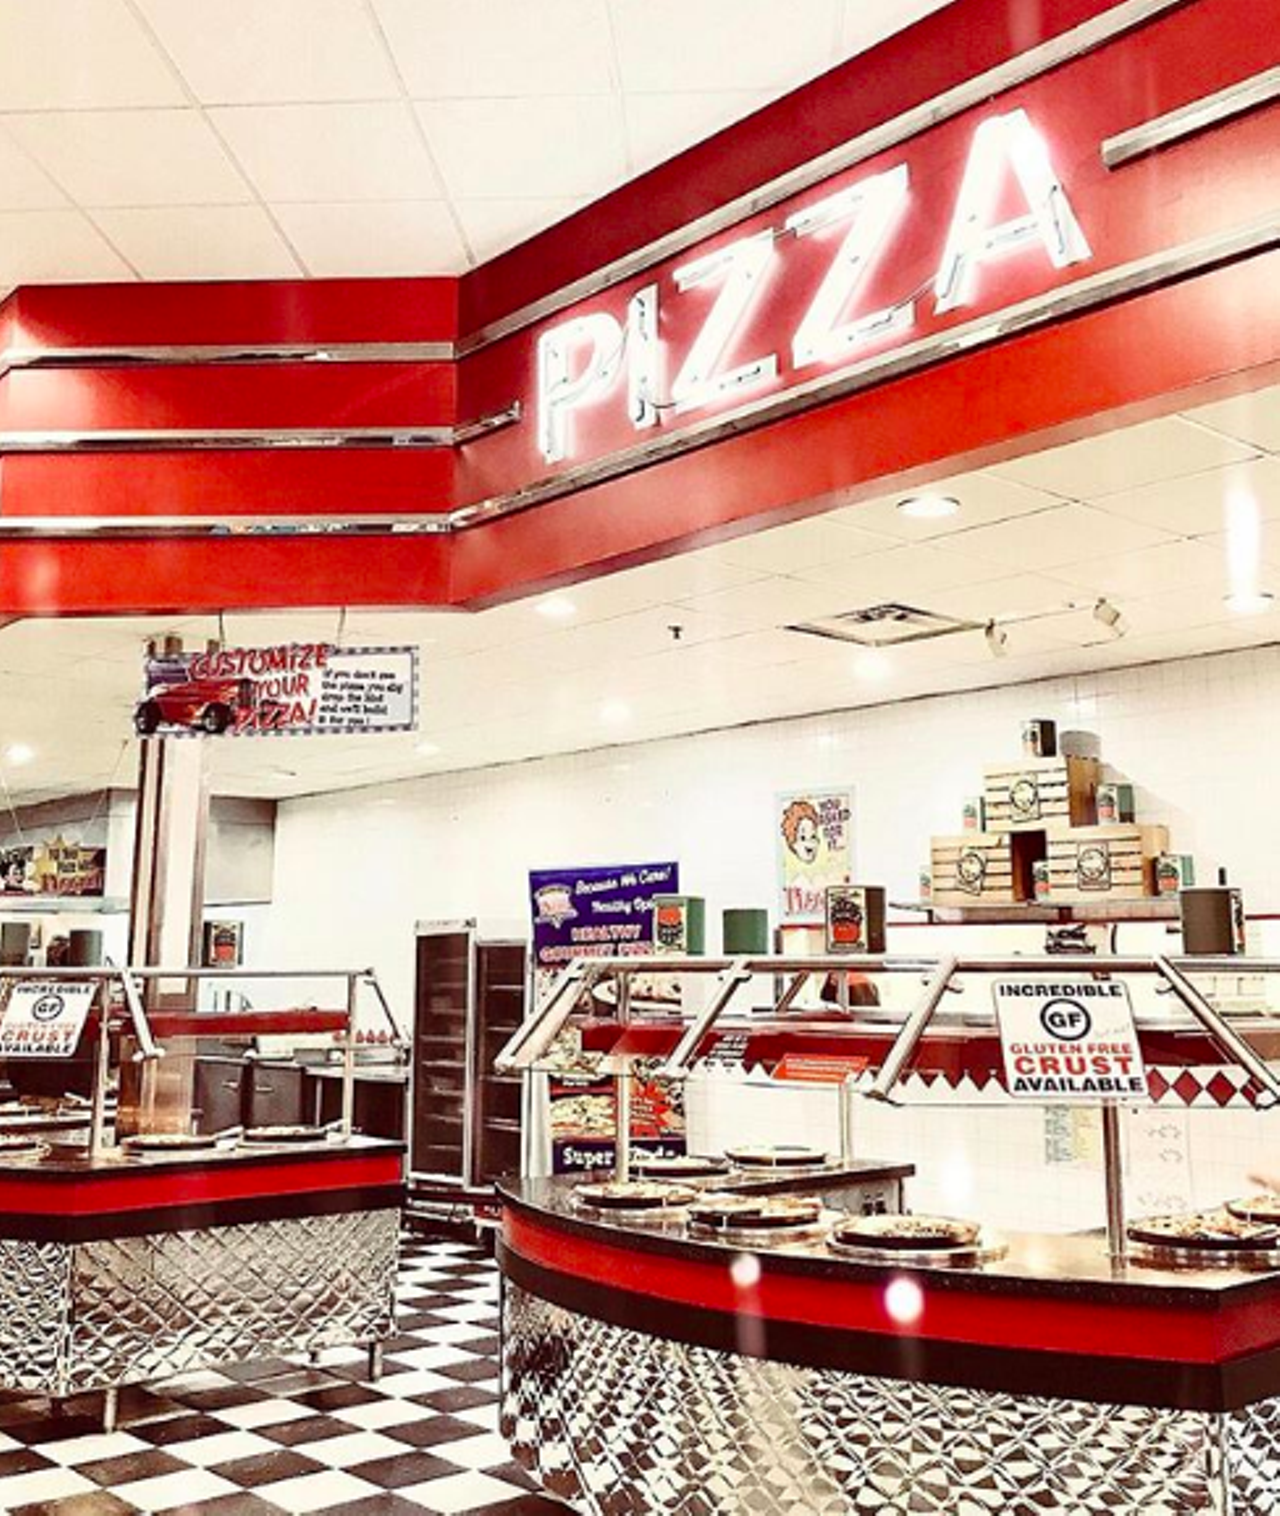 Incredible Pizza Co.
11743 West Ave, (210) 610-6086, incrediblepizza.com
While not all kids can eat free here, little ones age 3 and under can score a free buffet meal any day of the week.
Photo via Instagram / tally.dilbert